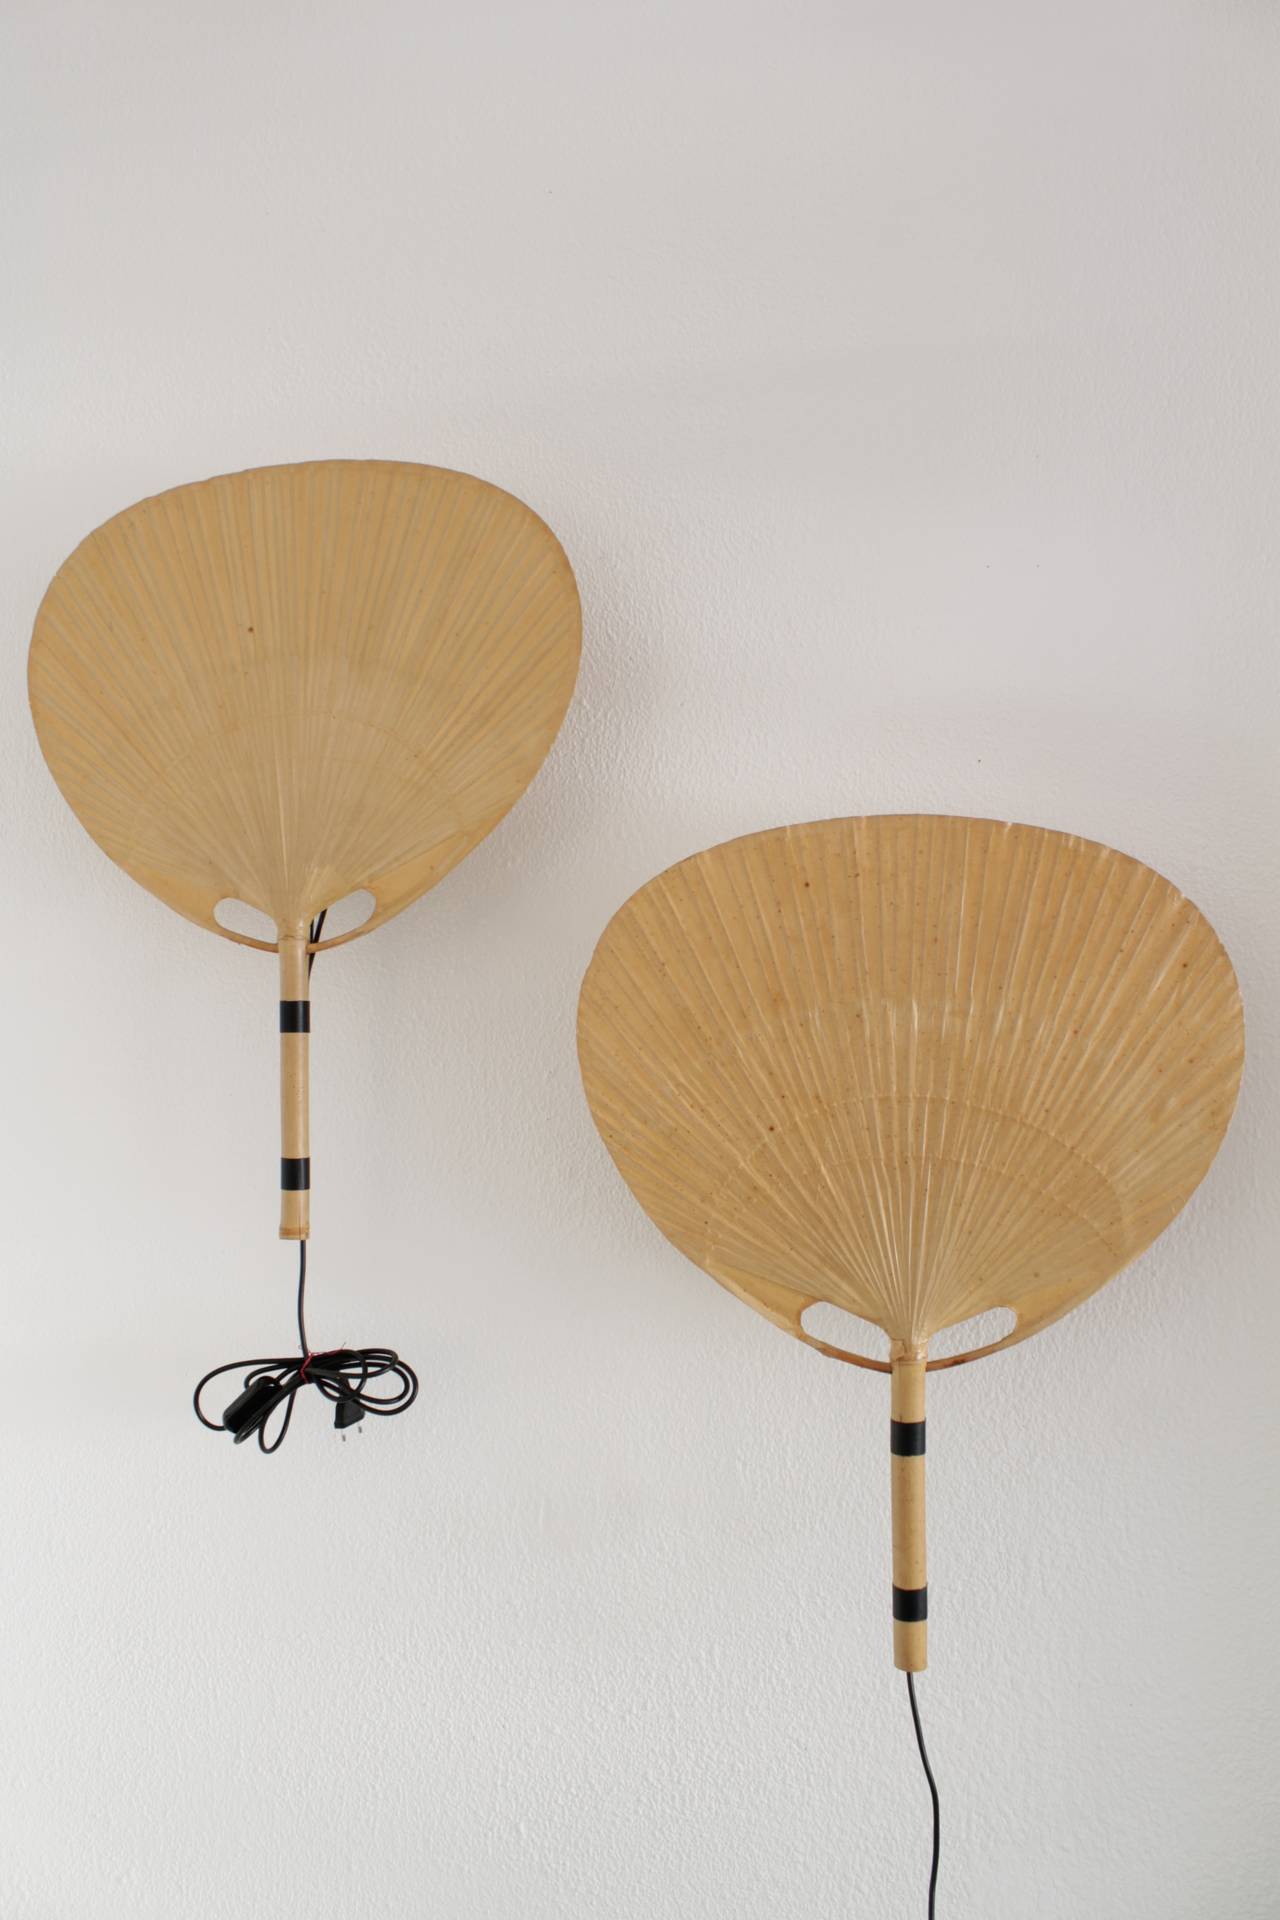 Pair of Uchiwa wall lamp by Ingo Maurer ca. 1974
Bamboo and papered wicker
Good vintage condition, original fixtures and electrification